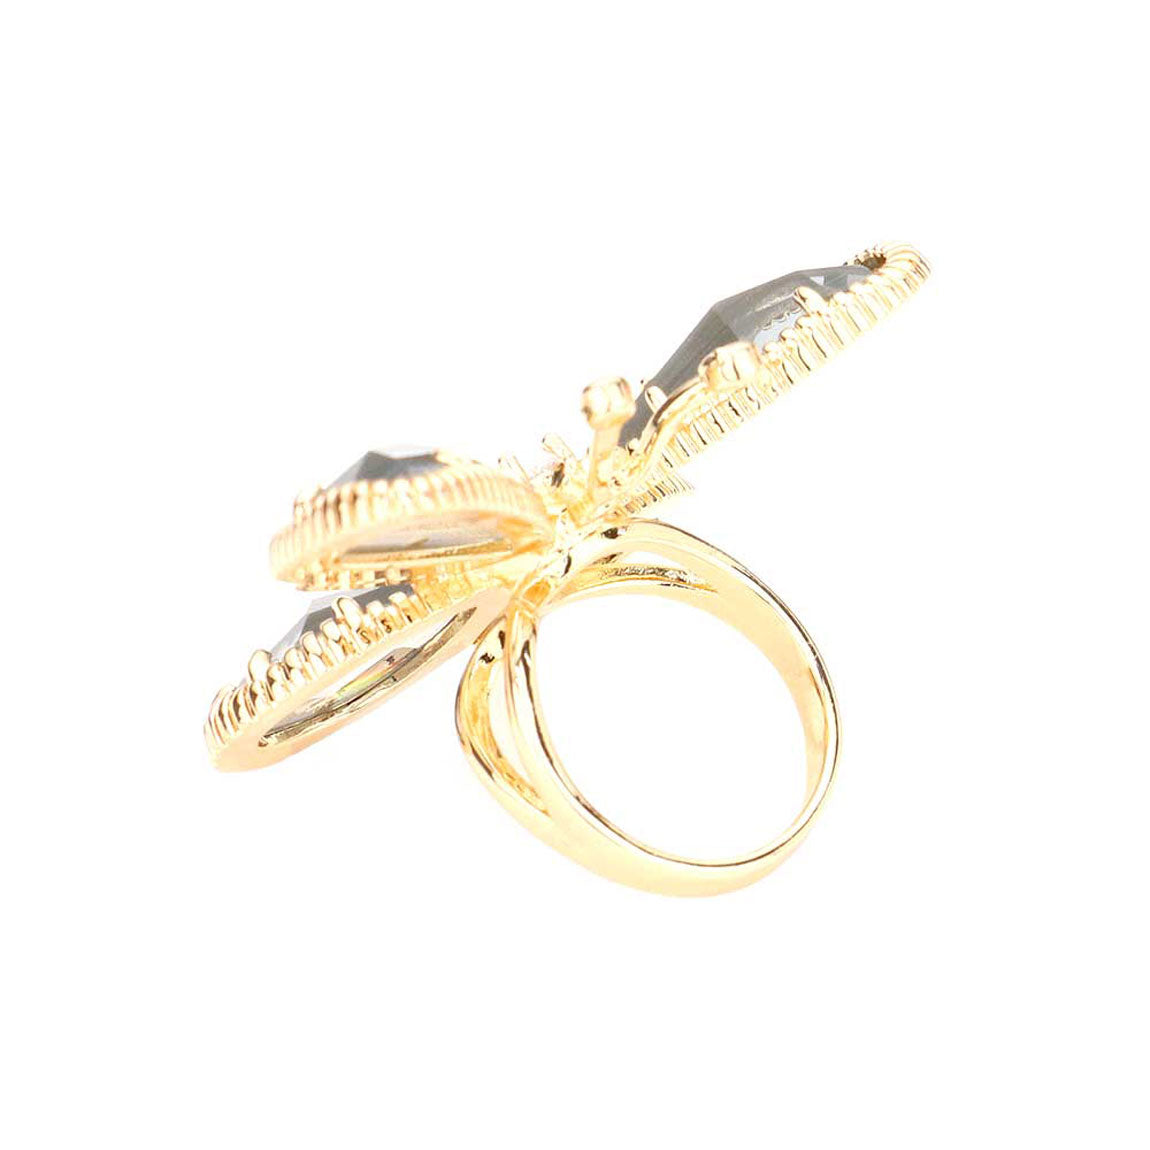 Gold Glass Stone Accented CZ Pave Butterfly Ring. These will remind you that you can achieve what you set out to do. Butterfly represents transformation and new beginnings. If you are drawn to positivity this delicate ring is the best match for you.  Beautifully crafted design adds a gorgeous glow to any outfit. Jewelry that fits your lifestyle! Perfect Birthday Gift, Anniversary Gift, Mother's Day Gift, Graduation Gift, Prom Jewelry, Just Because Gift, Thank you Gift, Valentine's Day Gift.